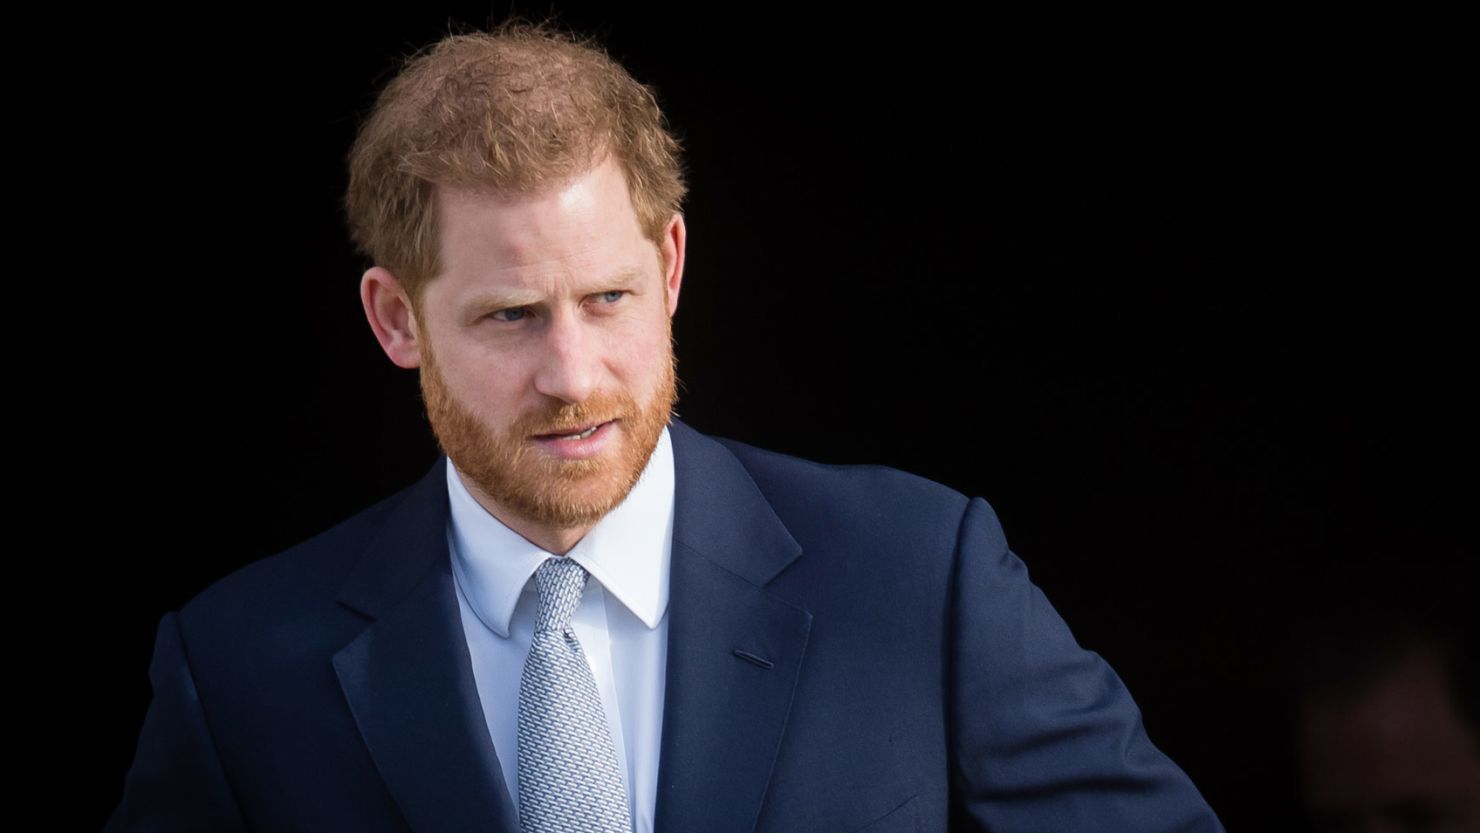 Prince Harry at an event in London, England in January 2020.